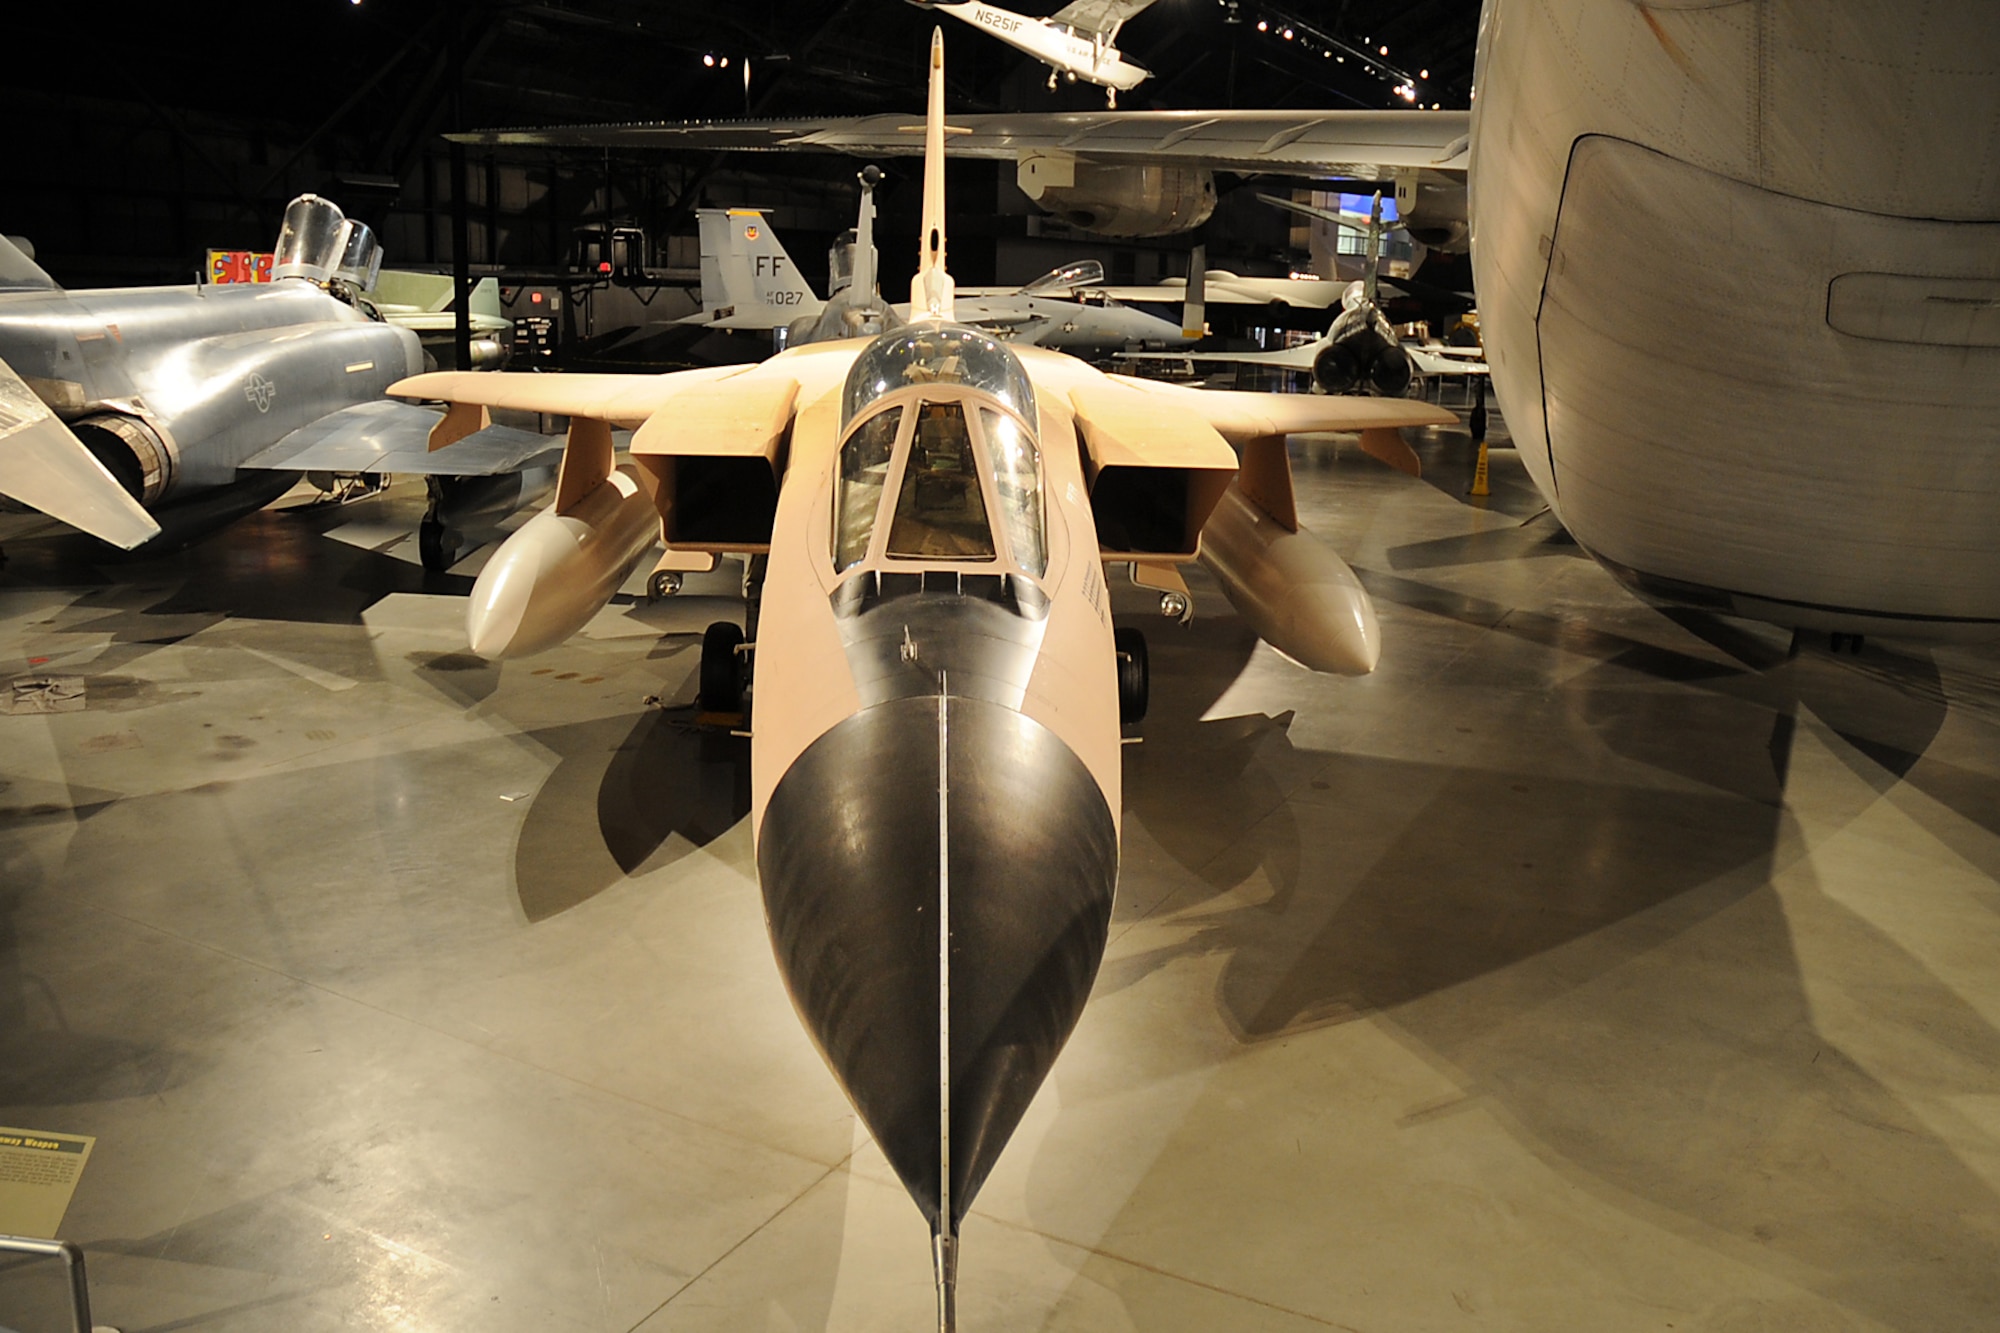 DAYTON, Ohio -- Panavia Tornado in the Cold War Gallery at the National Museum of the United States Air Force. (U.S. Air Force photo)
